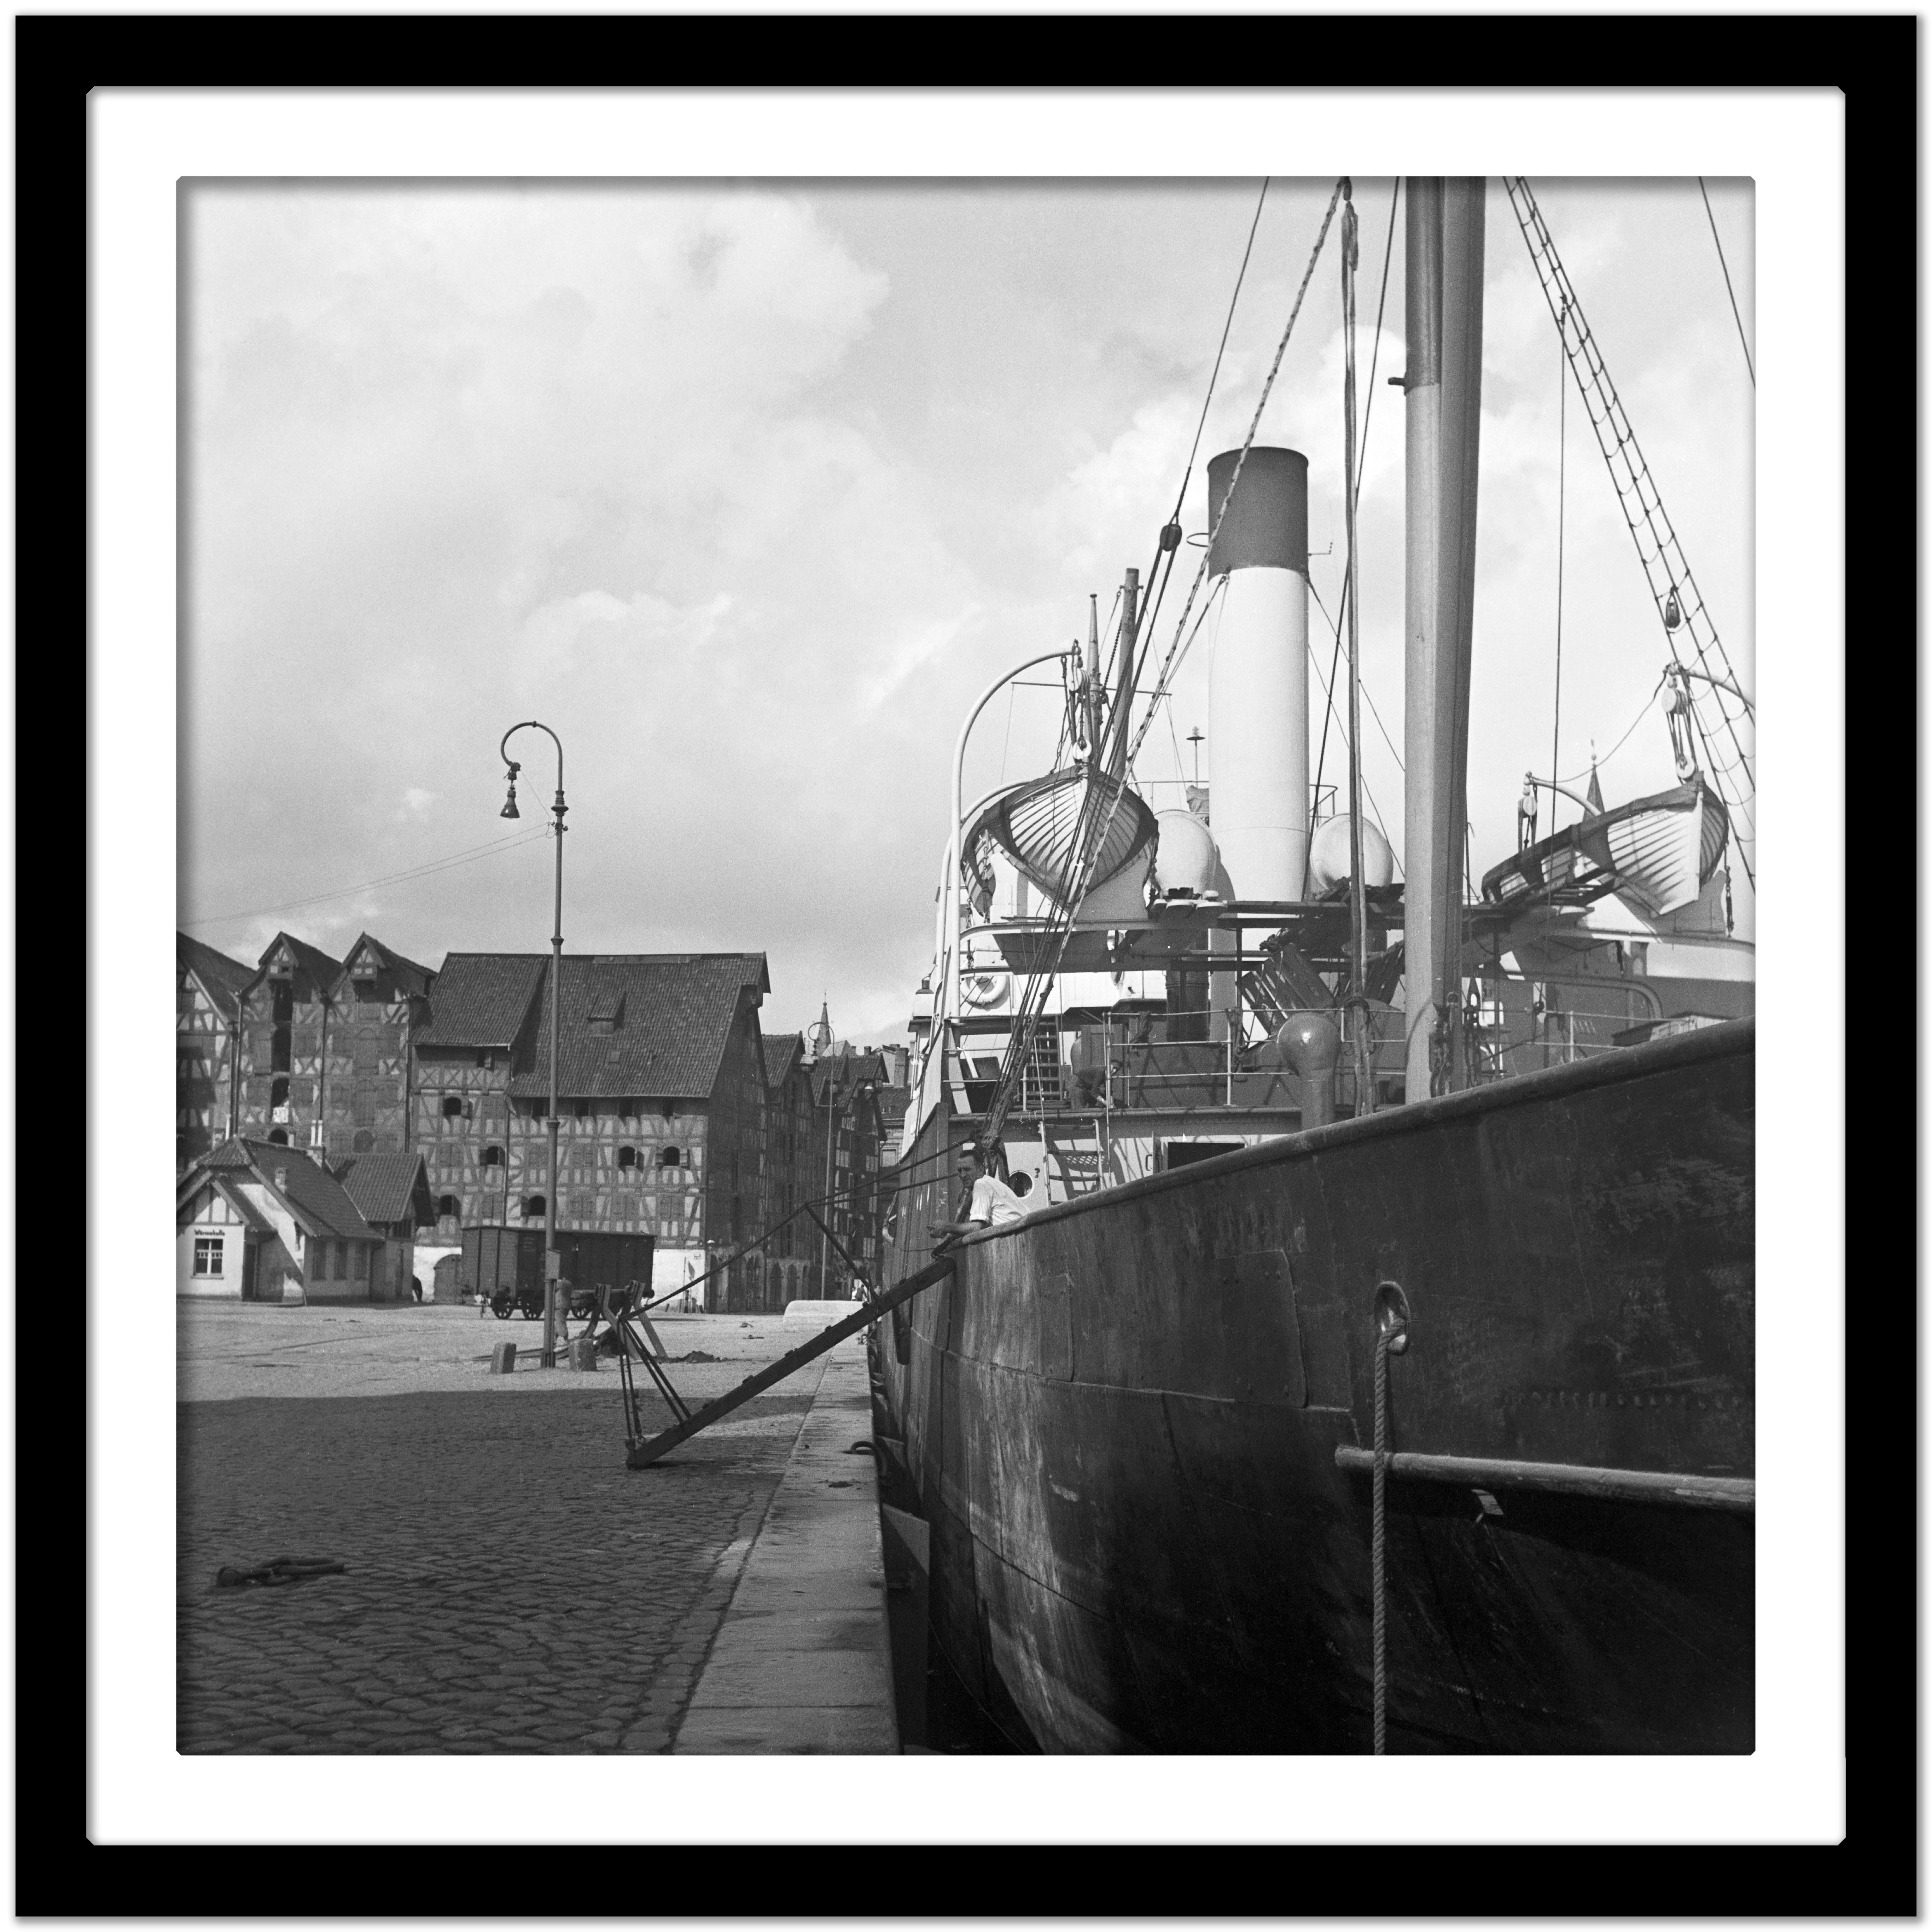 Ships at Koenigsberg harbor in East Prussia, Germany 1937 Printed Later - Modern Photograph by Karl Heinrich Lämmel